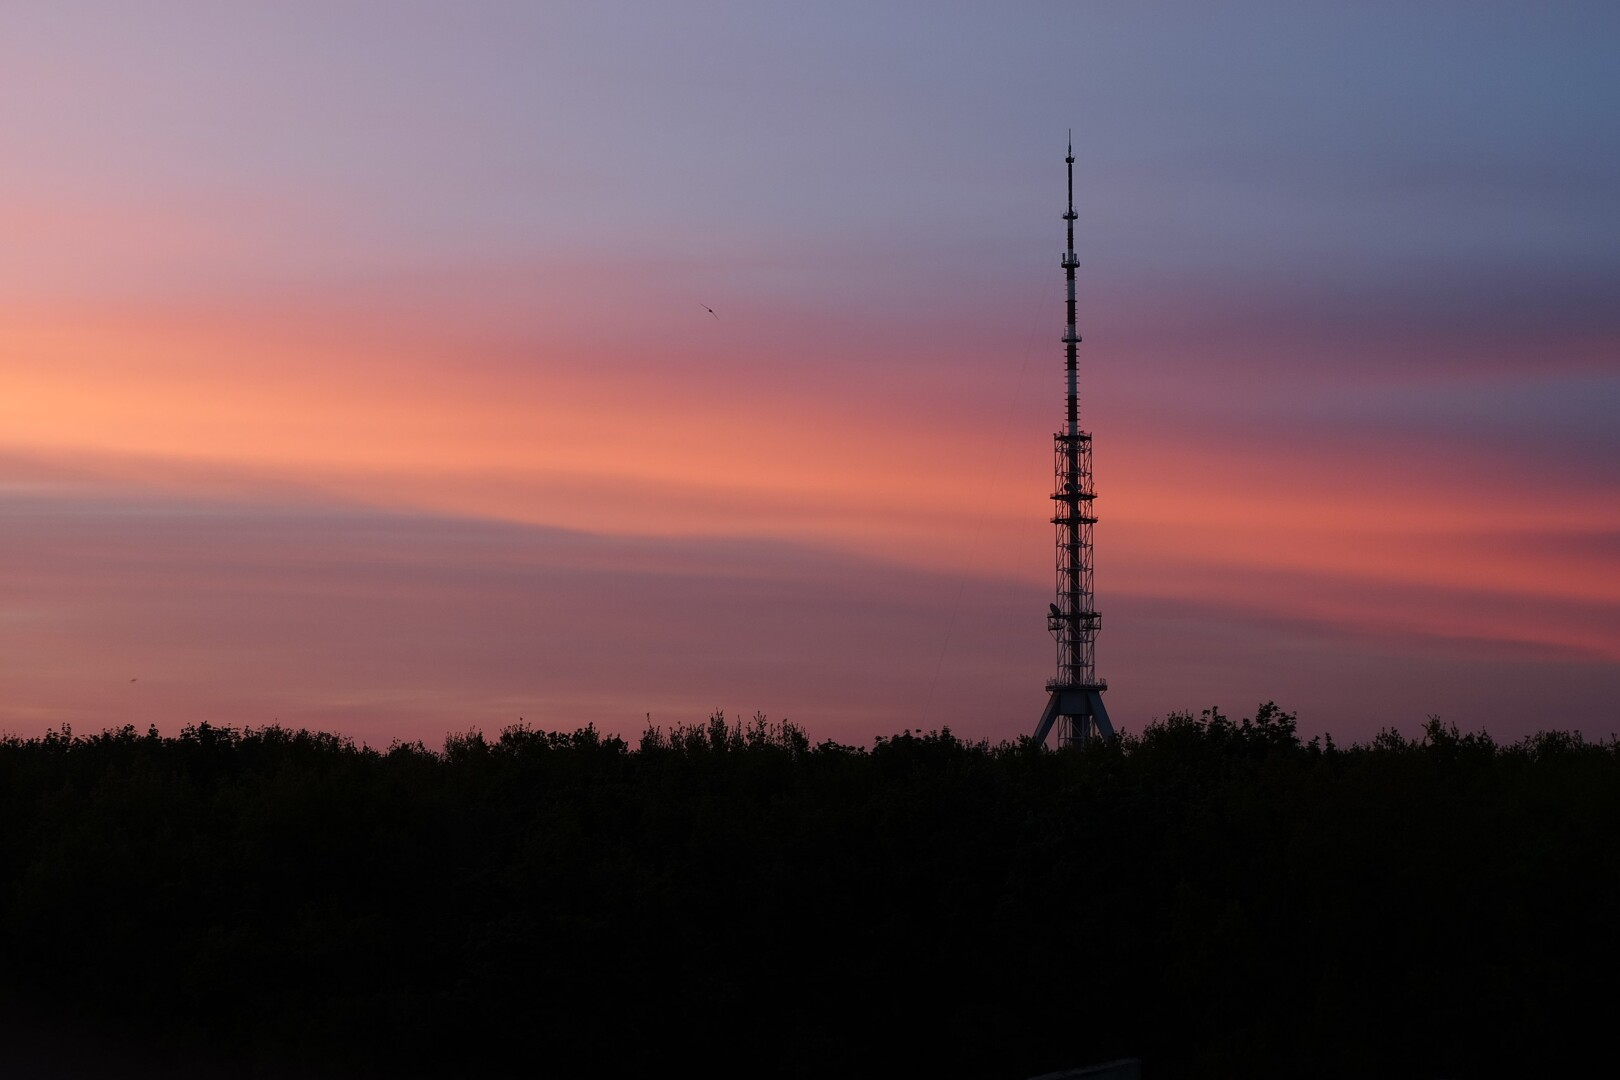 // Fernsehturm von Charkiw / Archivbild zur Illustration / Kharkiv TelevisionTower by Anaxibia is licensed under CC BY 4.0. https://creativecommons.org/licenses/by/4.0/